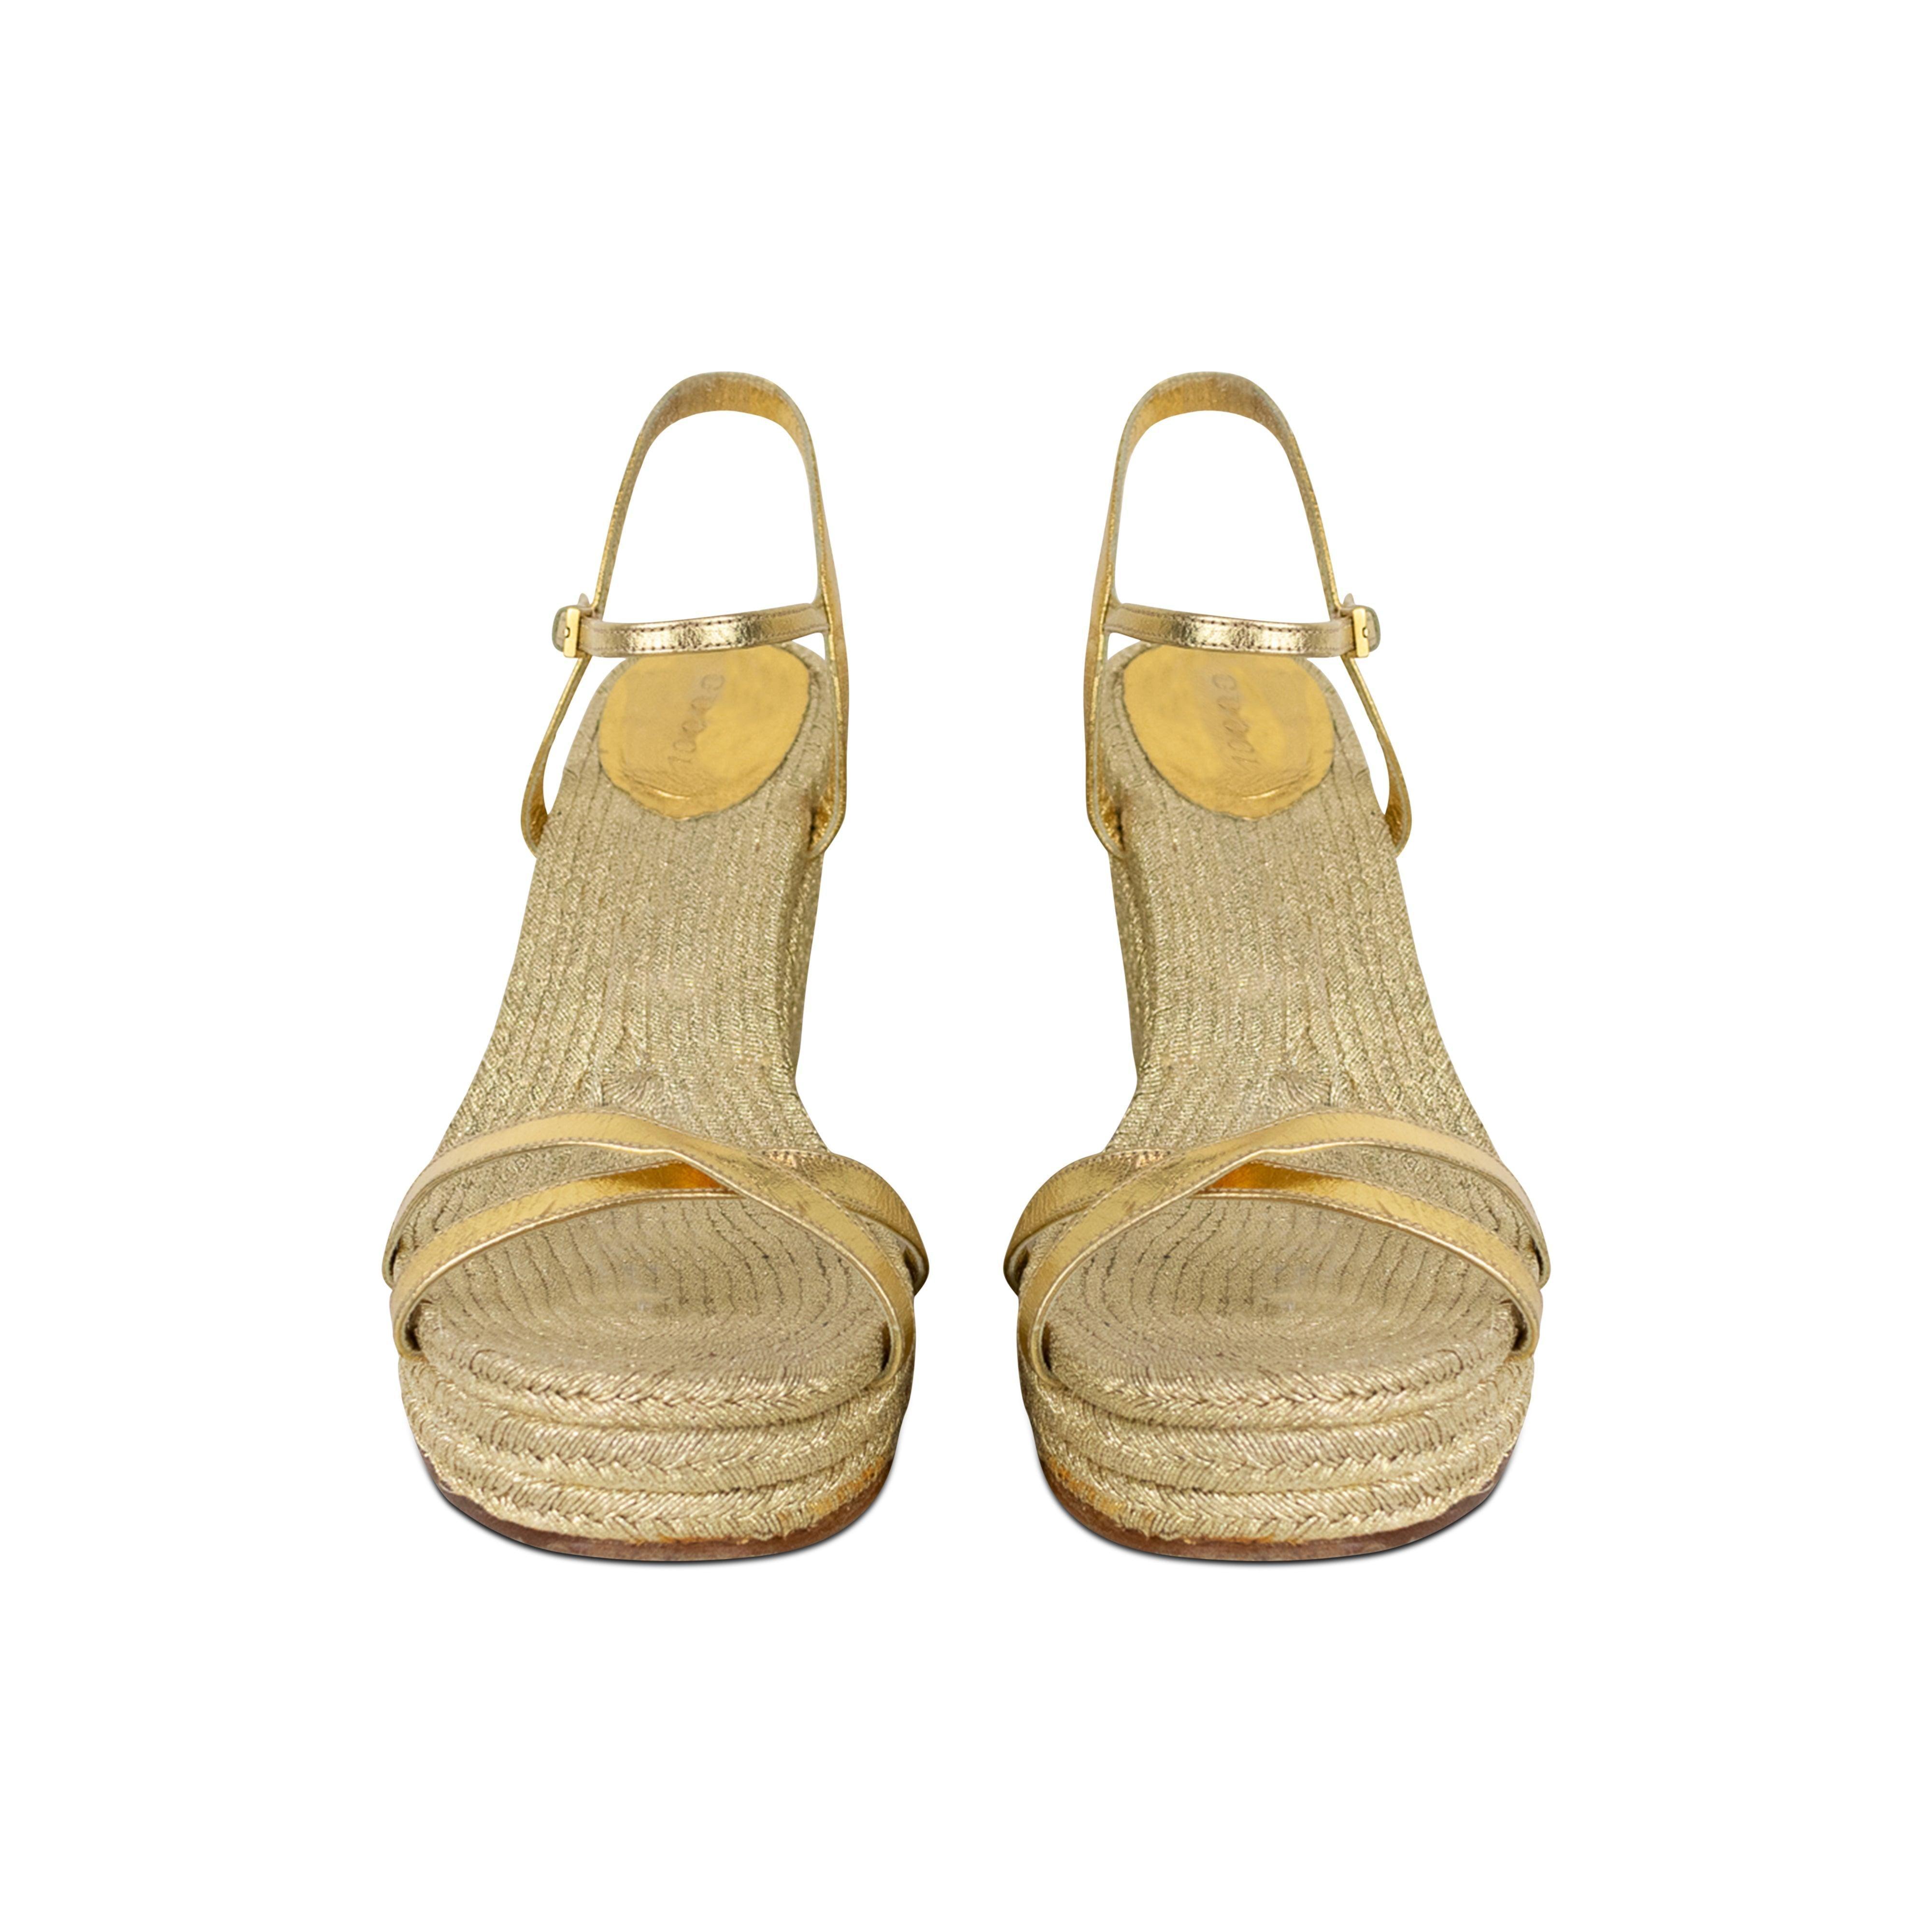 Gucci Gold Wedges - 39.5 - Fashionably Yours